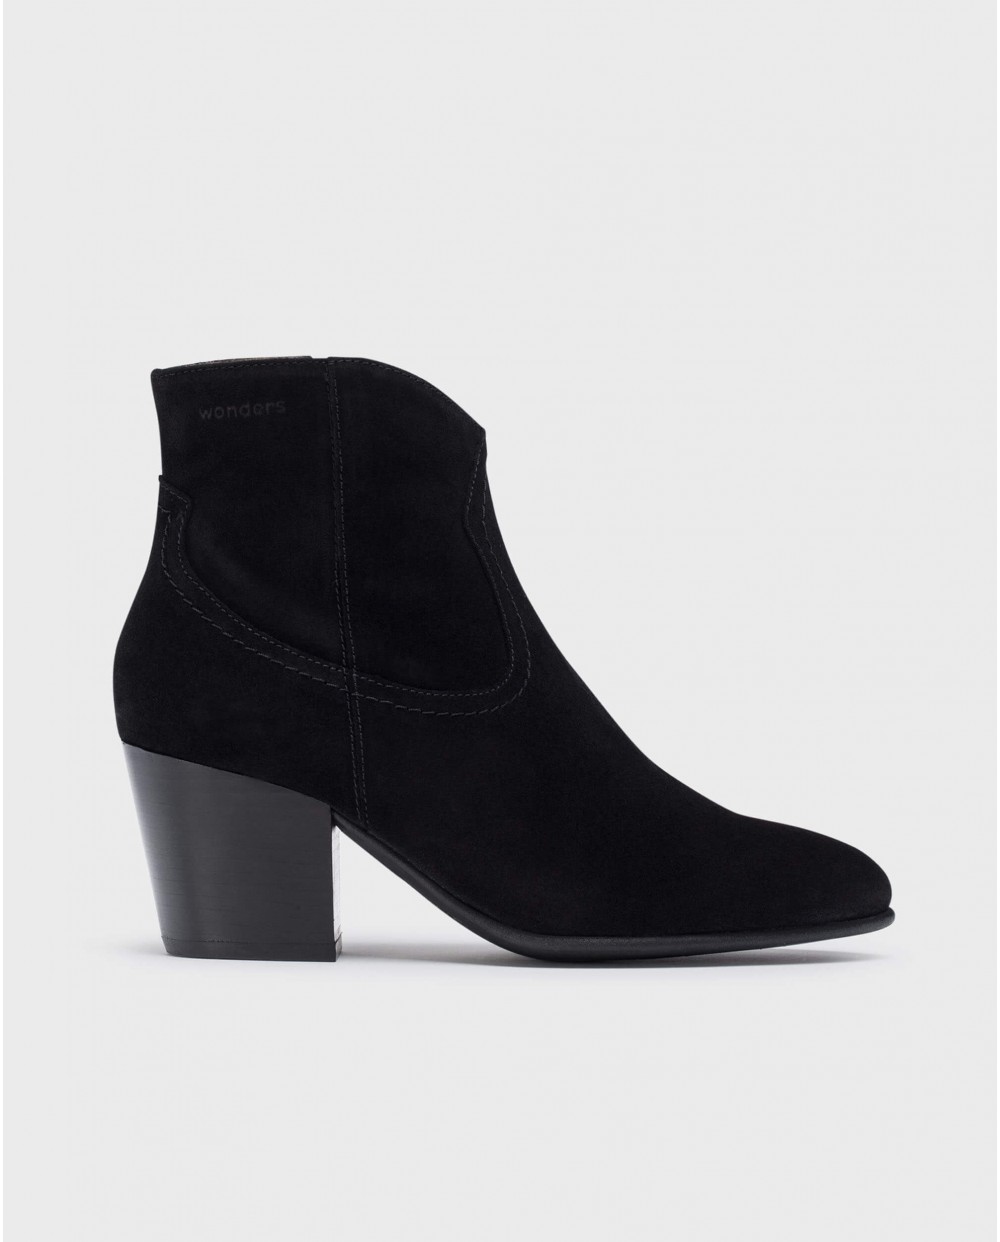 Wonders-Ankle Boots-Black CANE ankle boot